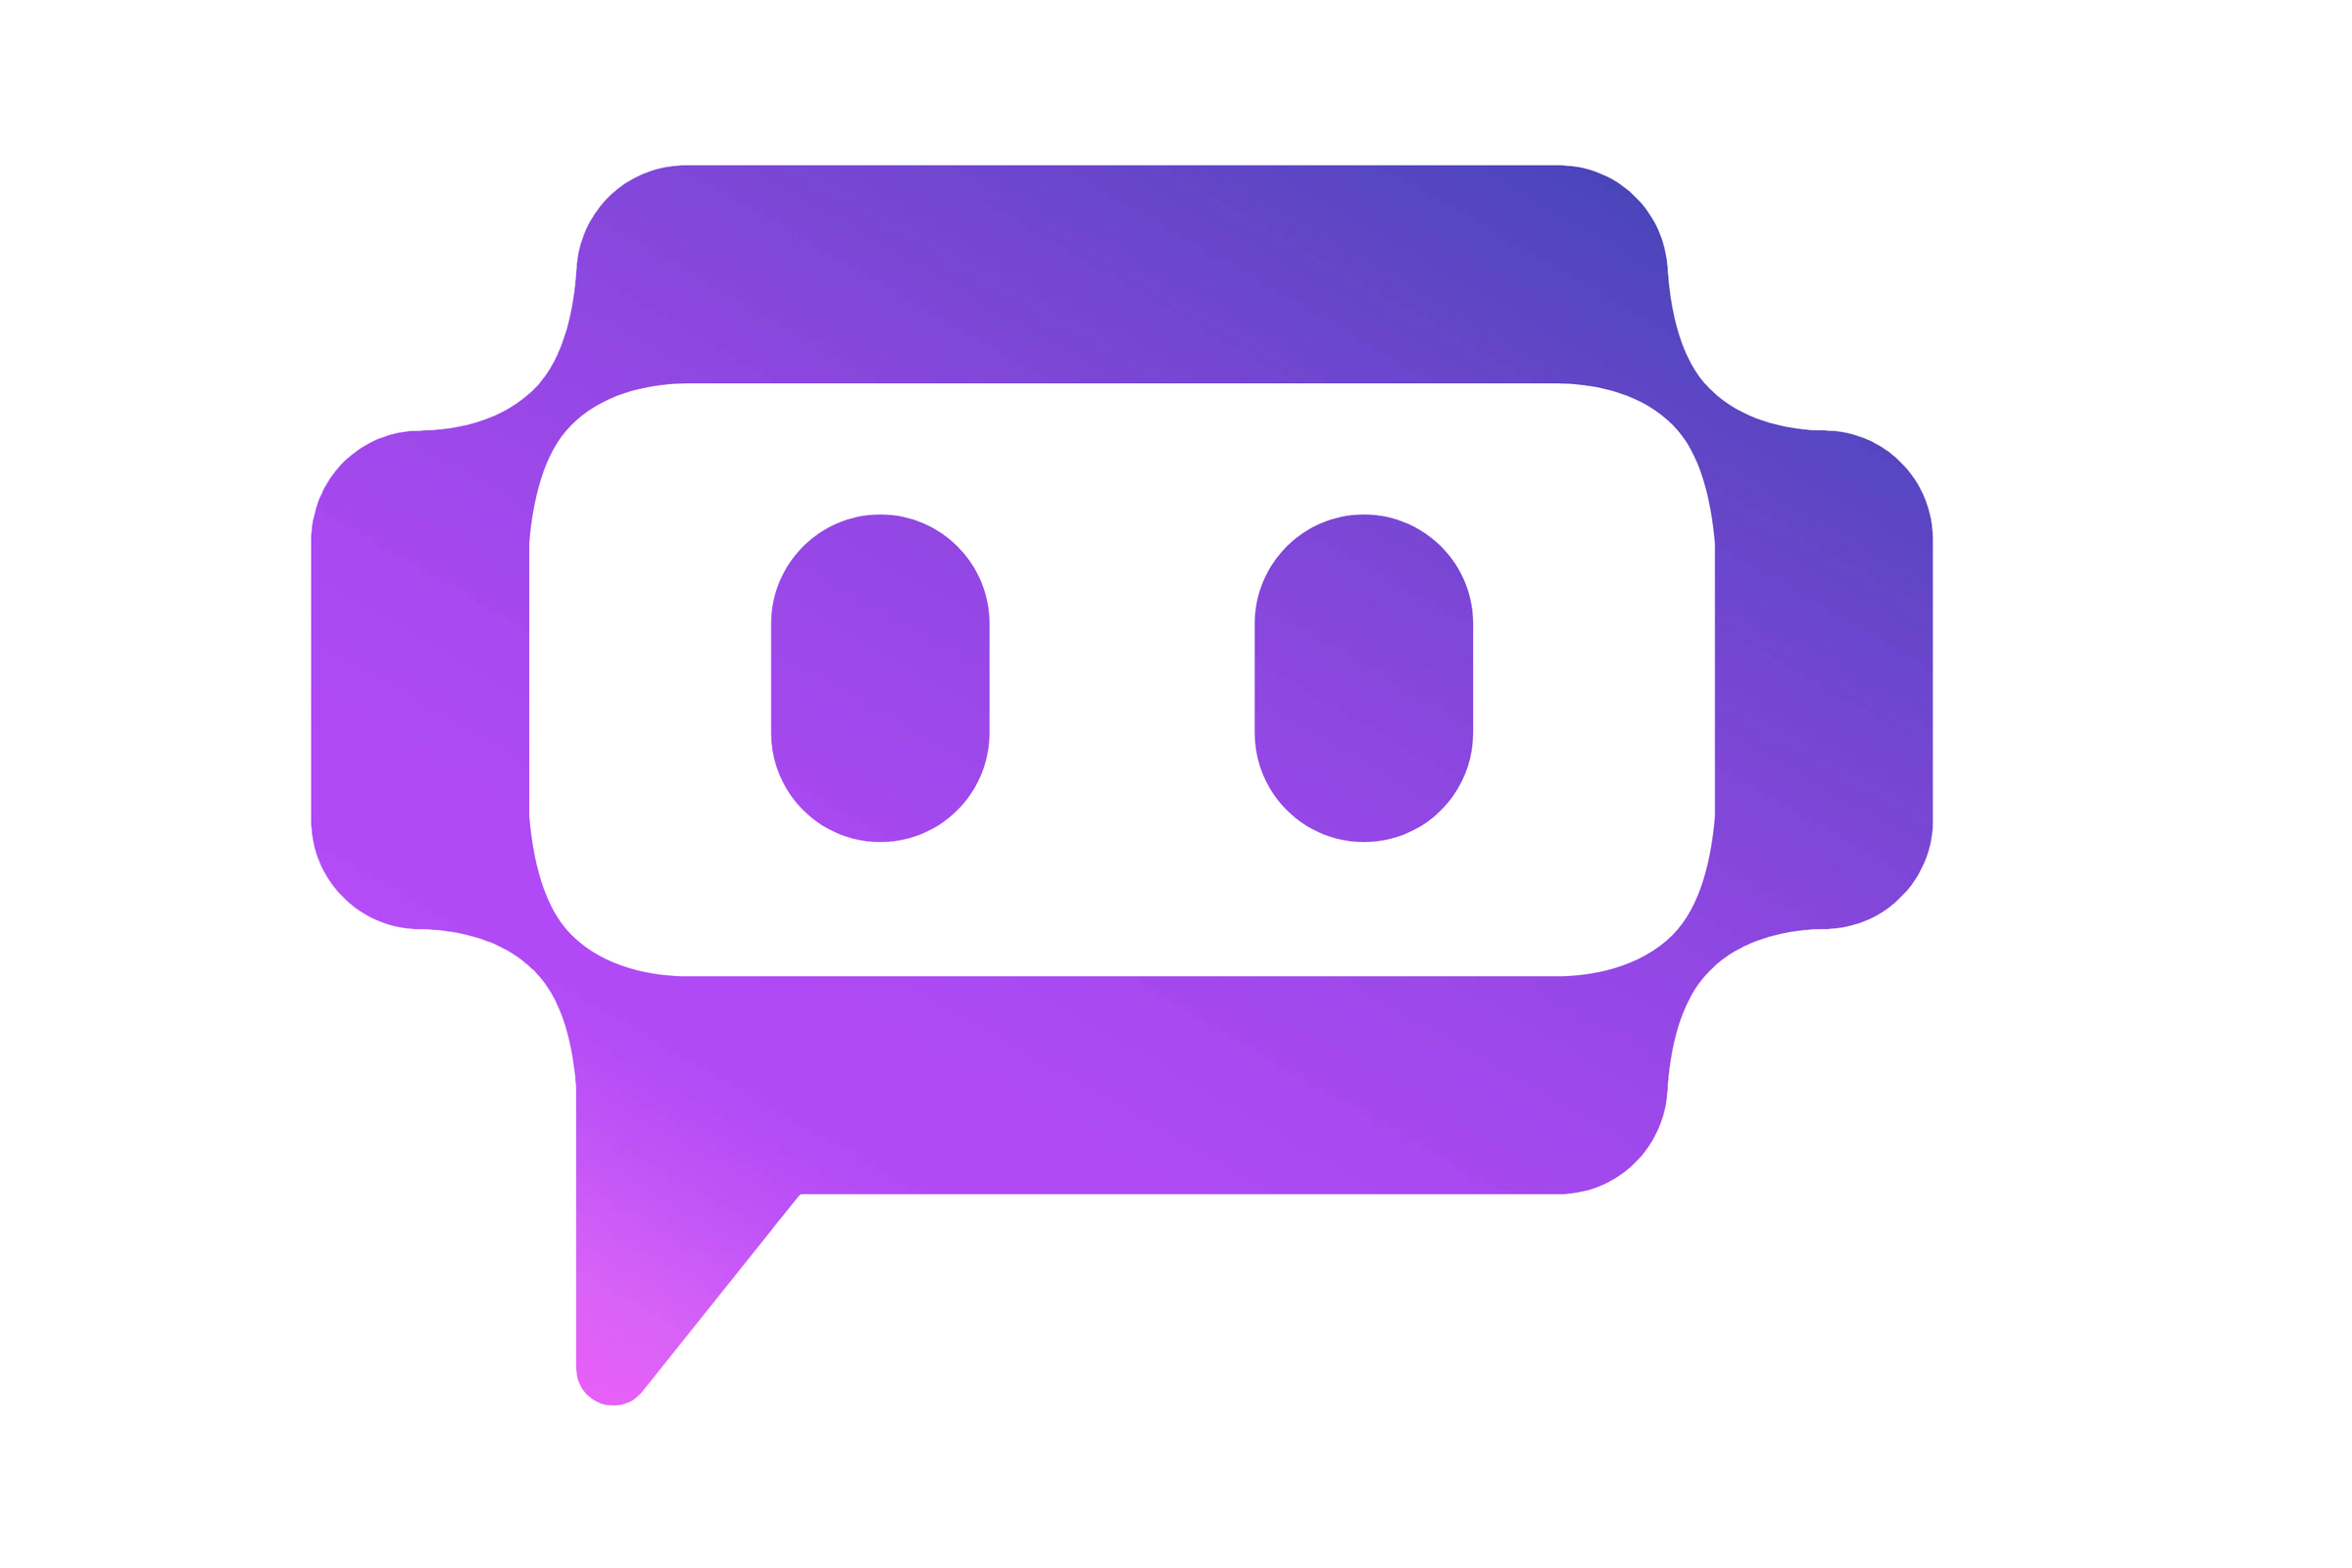 Poe’s logo, a purple chatbot character.